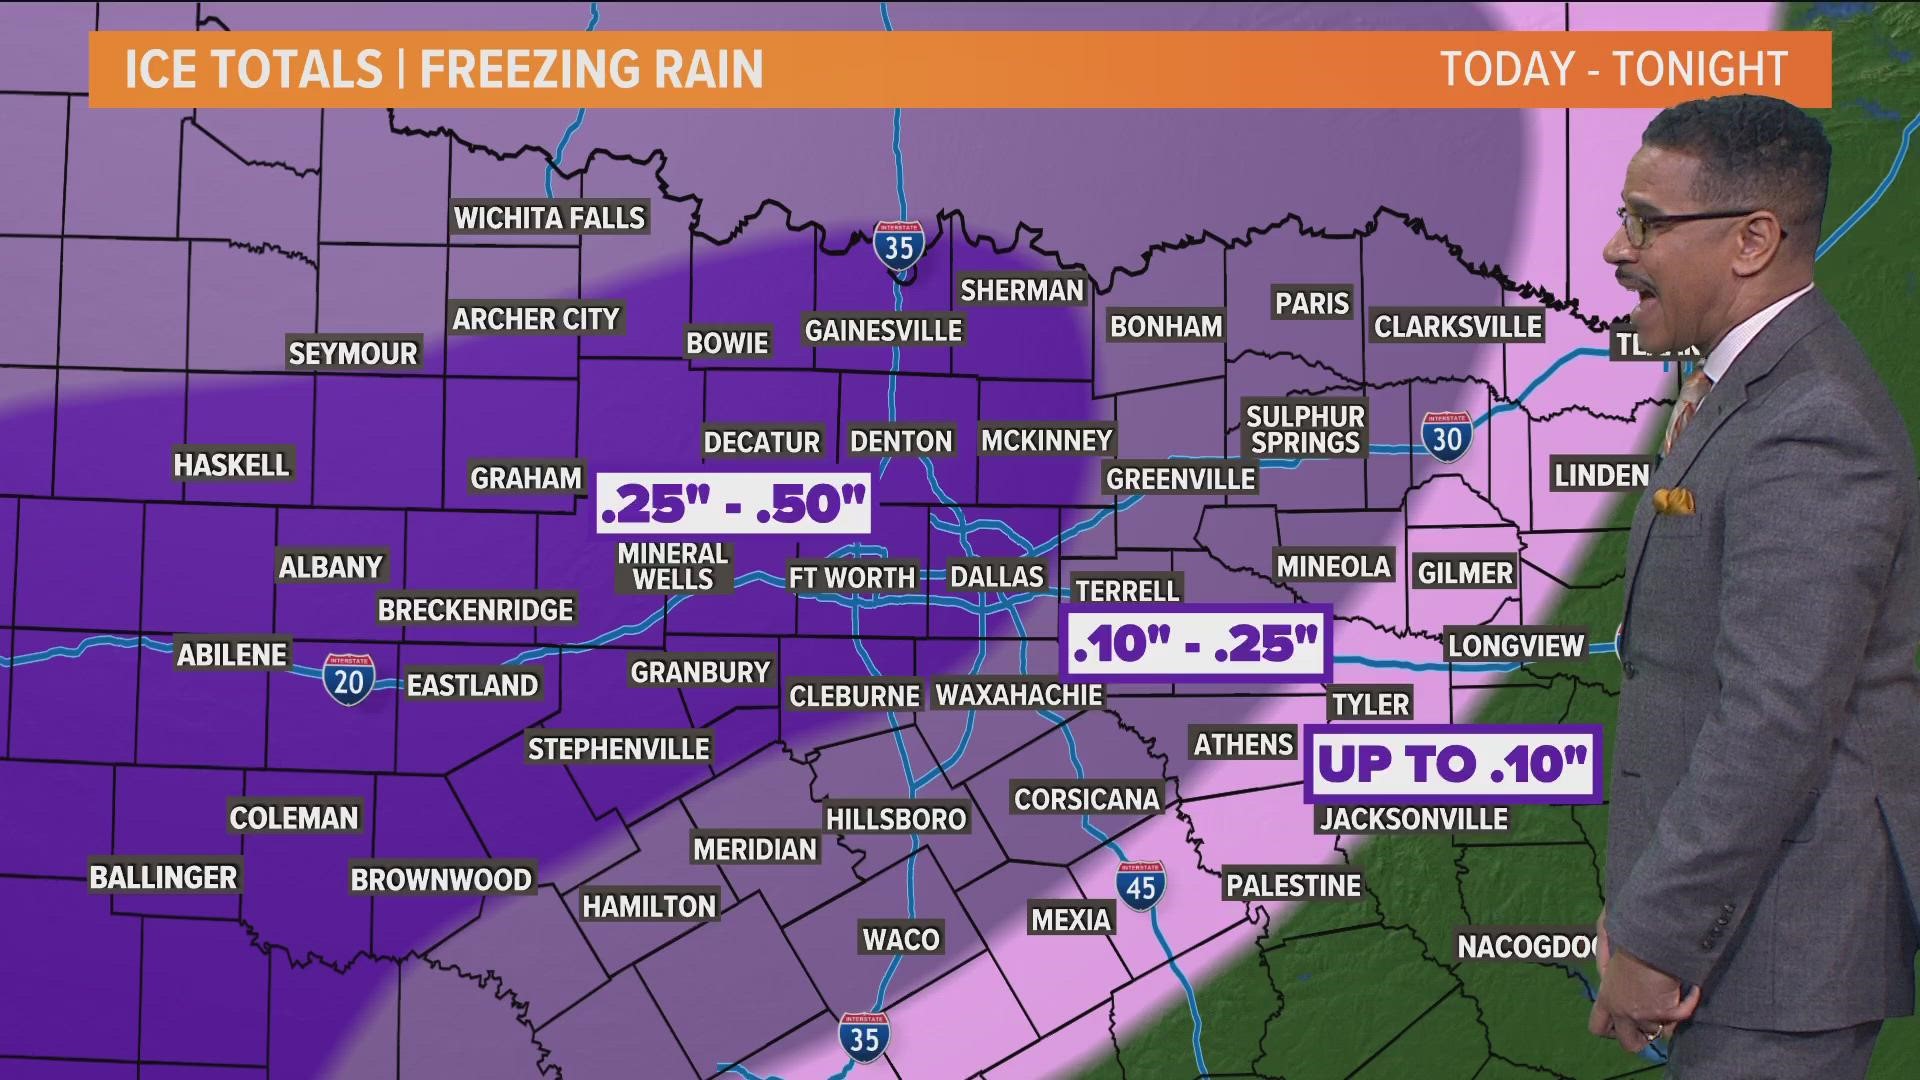 Temperatures are expected to remain below freezing until overnight Wednesday.